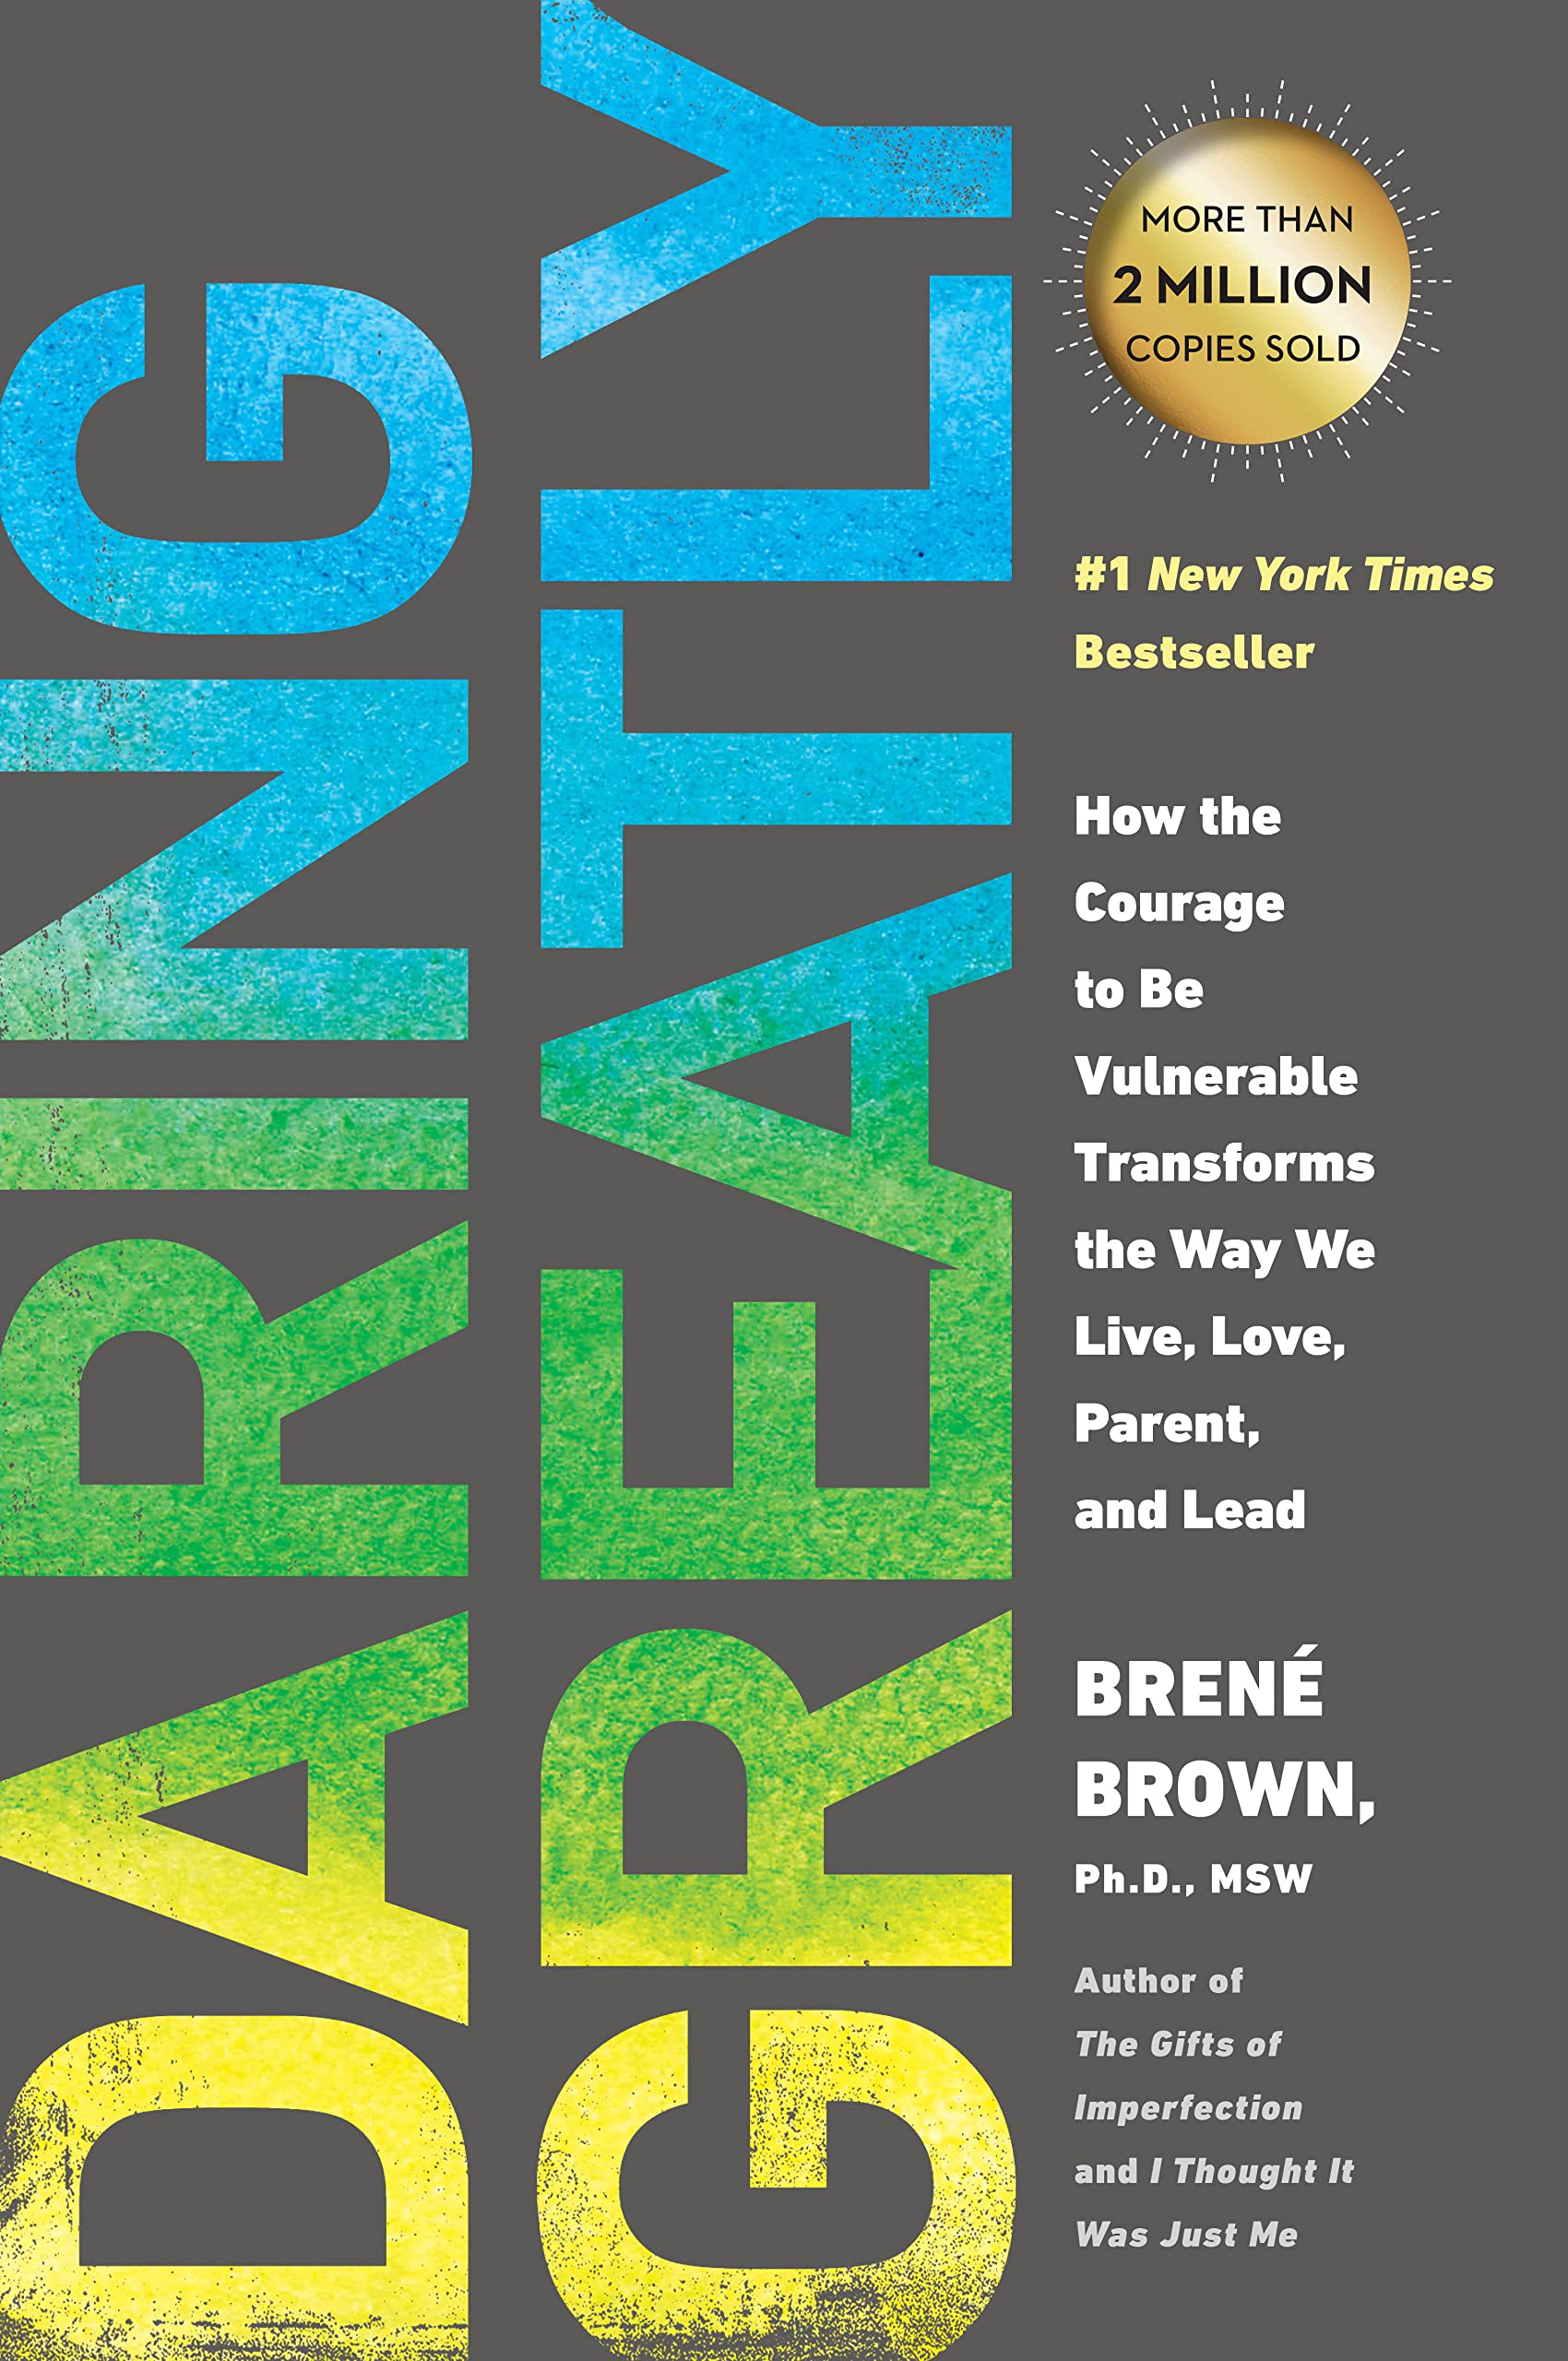 Daring Greatly: How the Courage to Be Vulnerable Transforms the Way We Live, Love, Parent, and Lead Paperback by Brené Brown